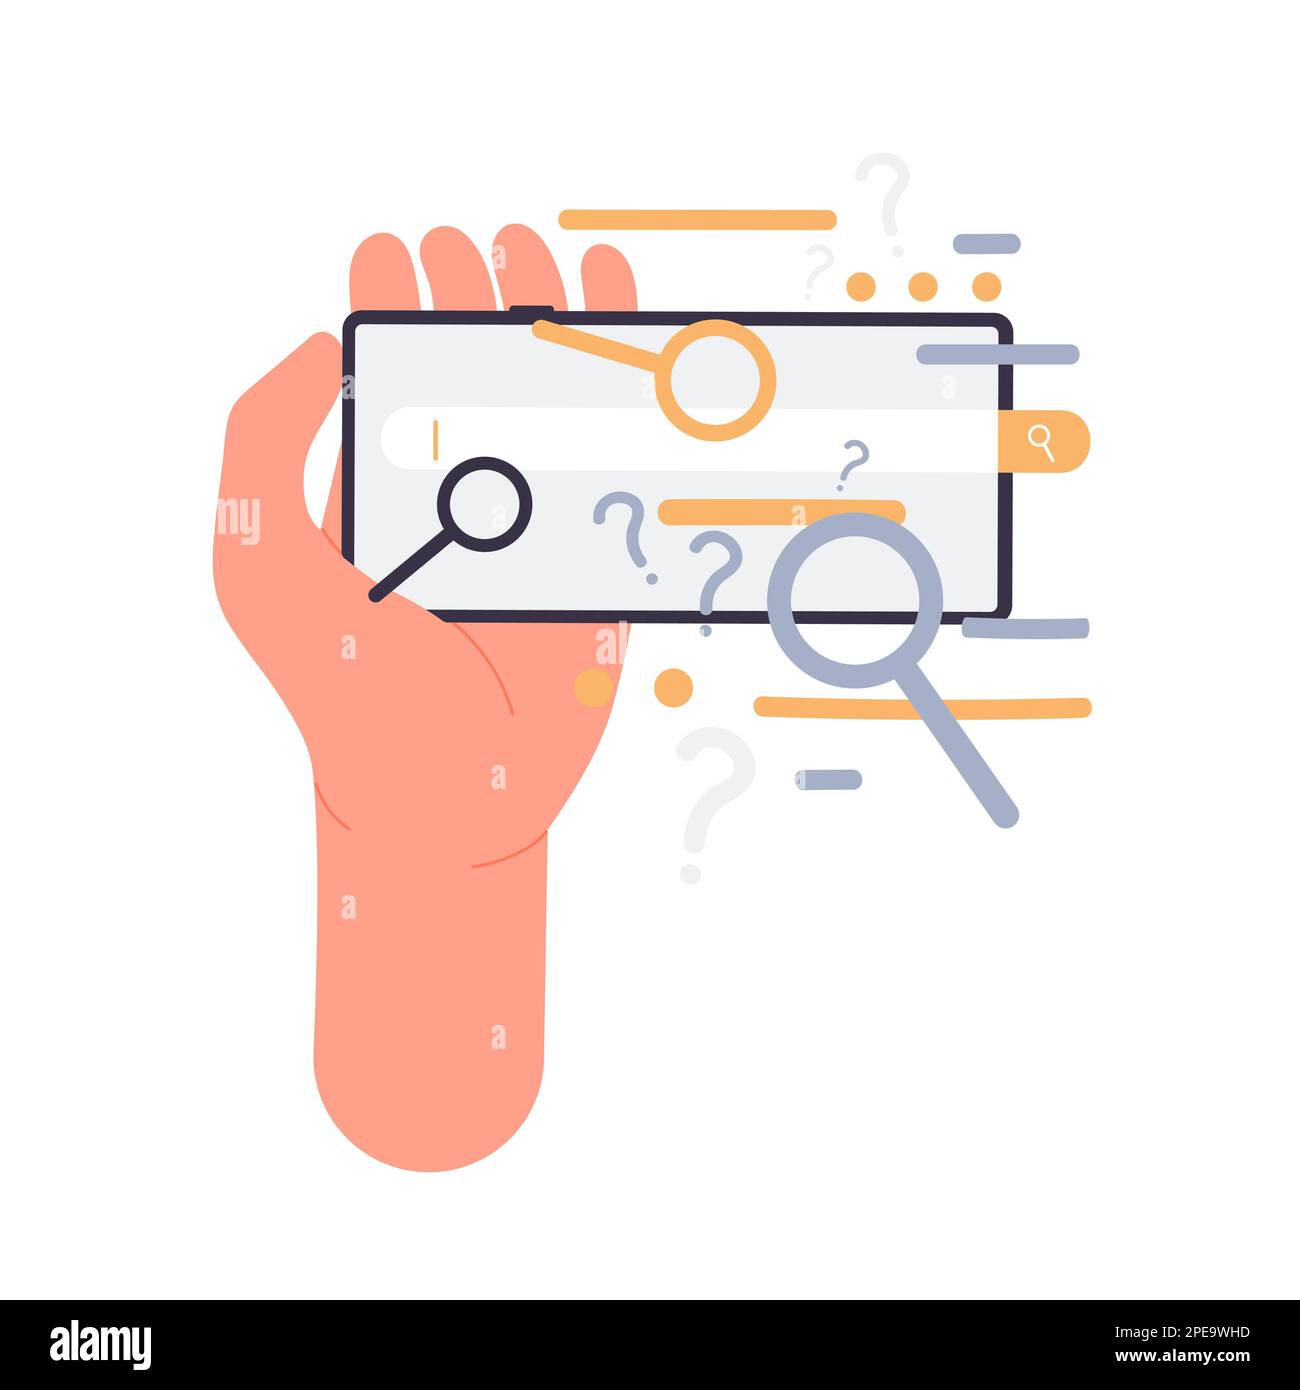 Phone in hand with search engine. Mobile searching information browser vector illustration Stock Vector